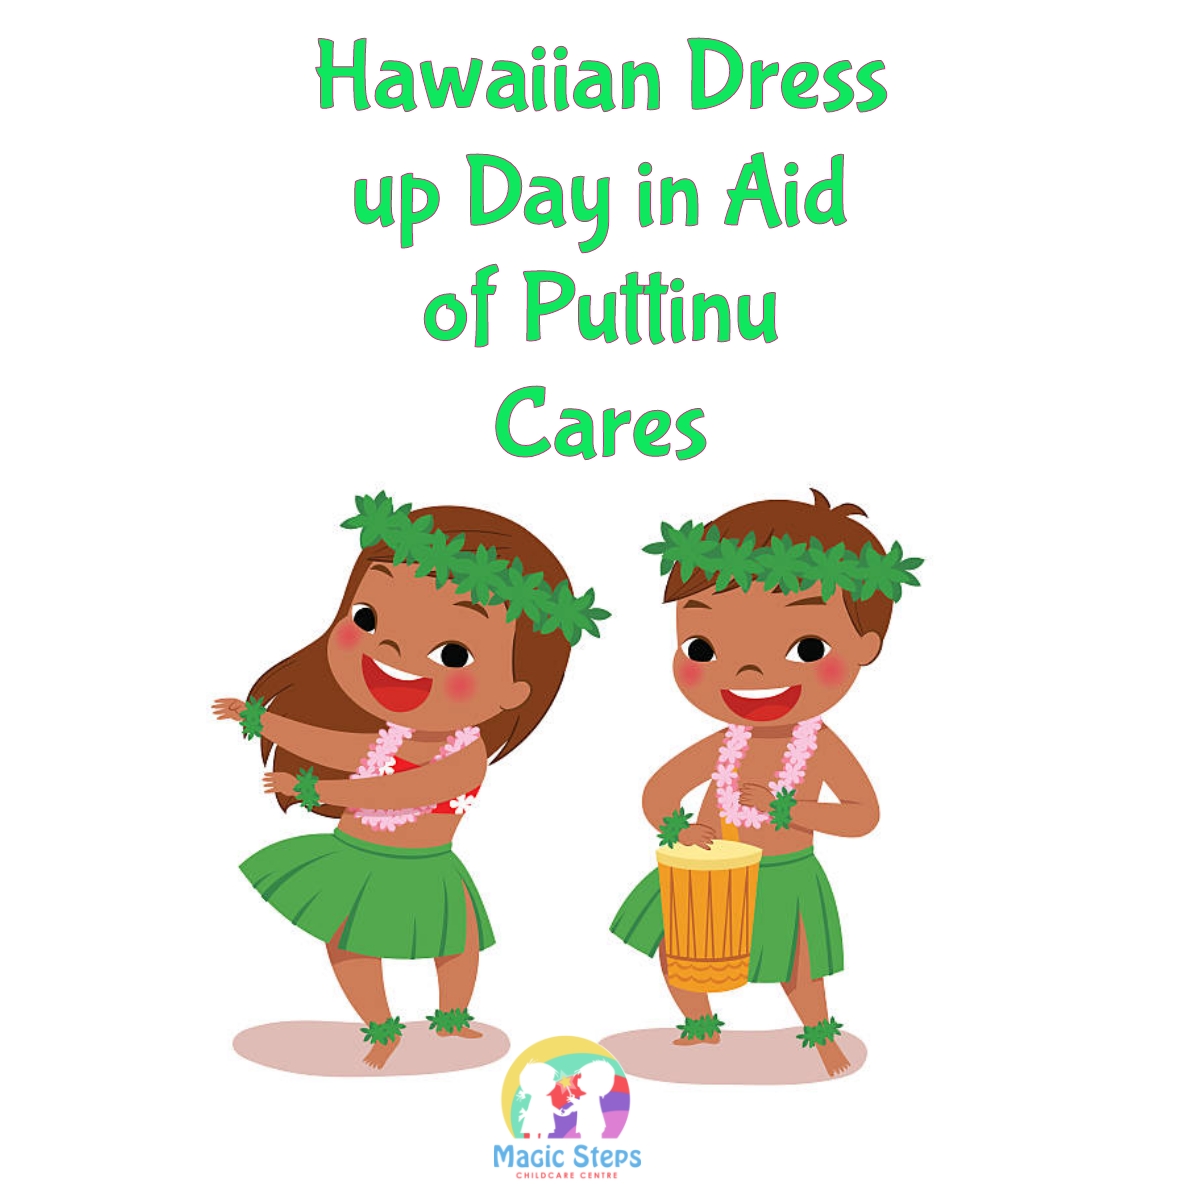 Hawaiian Dress up Day in Aid of Puttinu Cares- Wednesday 10th August